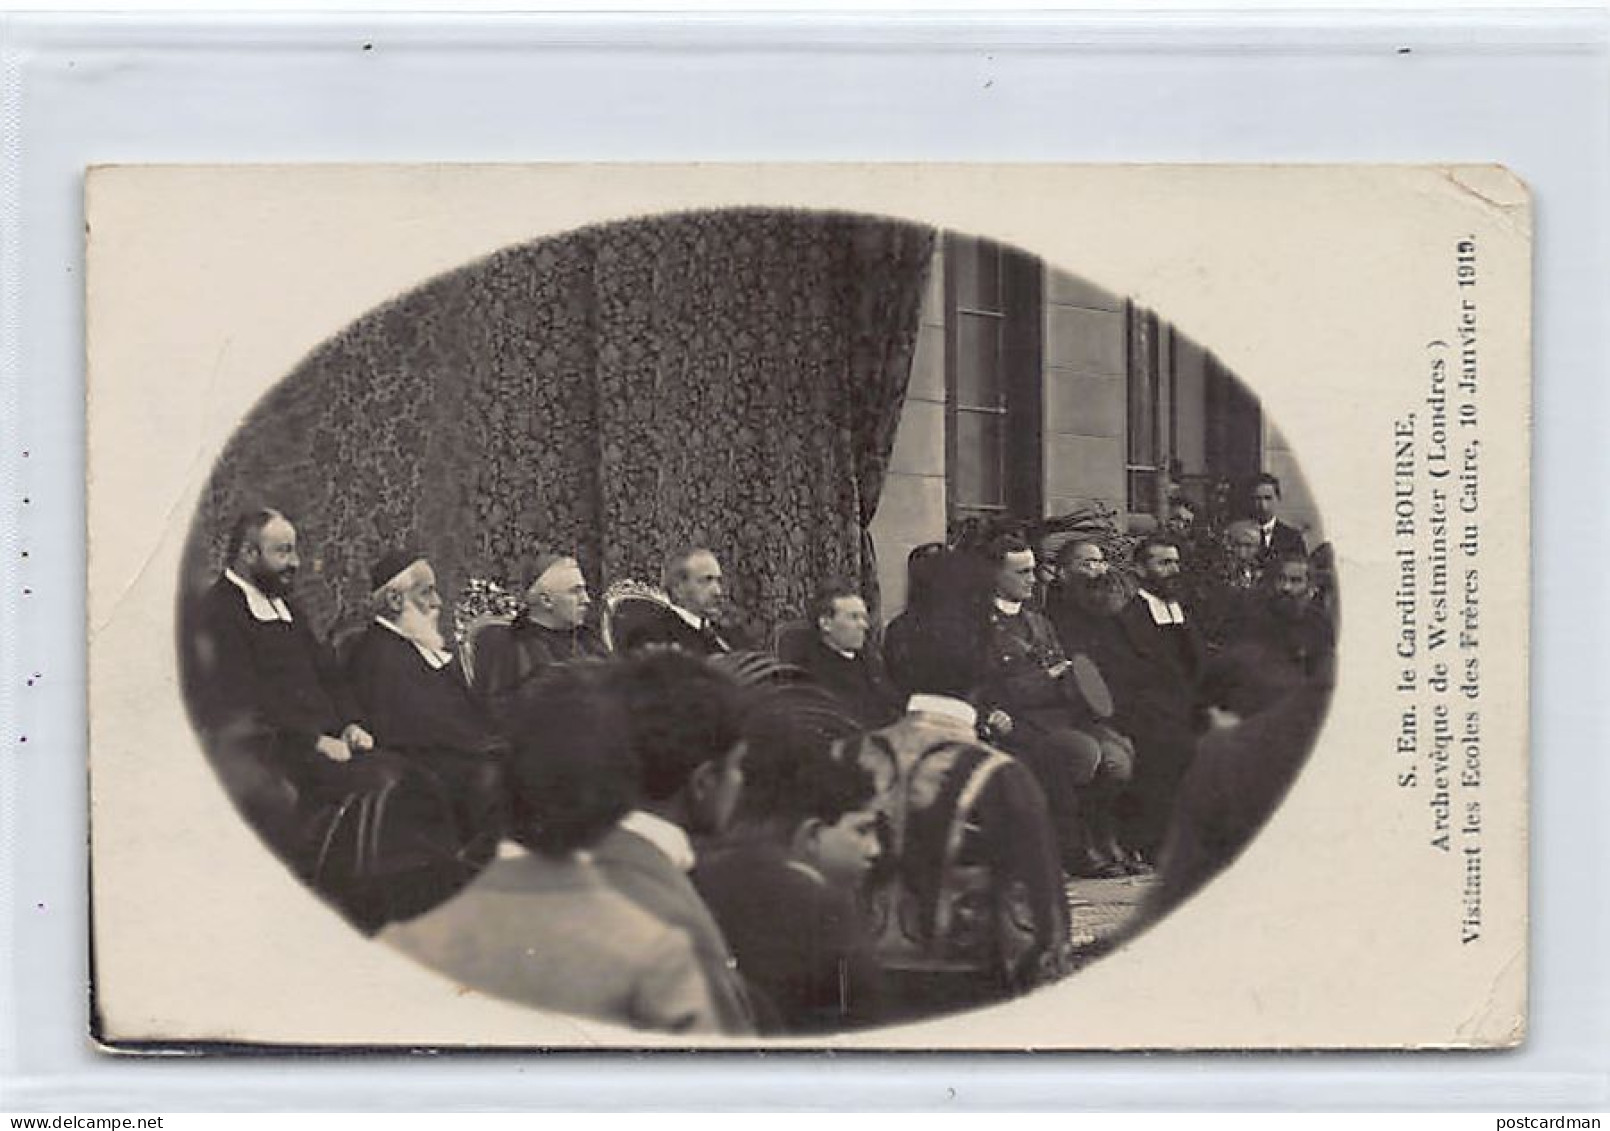 Egypt - CAIRO - H.E. Cardinal Bourne, Archbishop Of Westminster, Visiting The Ecole Des Frères, 10 January 1919 - REAL P - Caïro